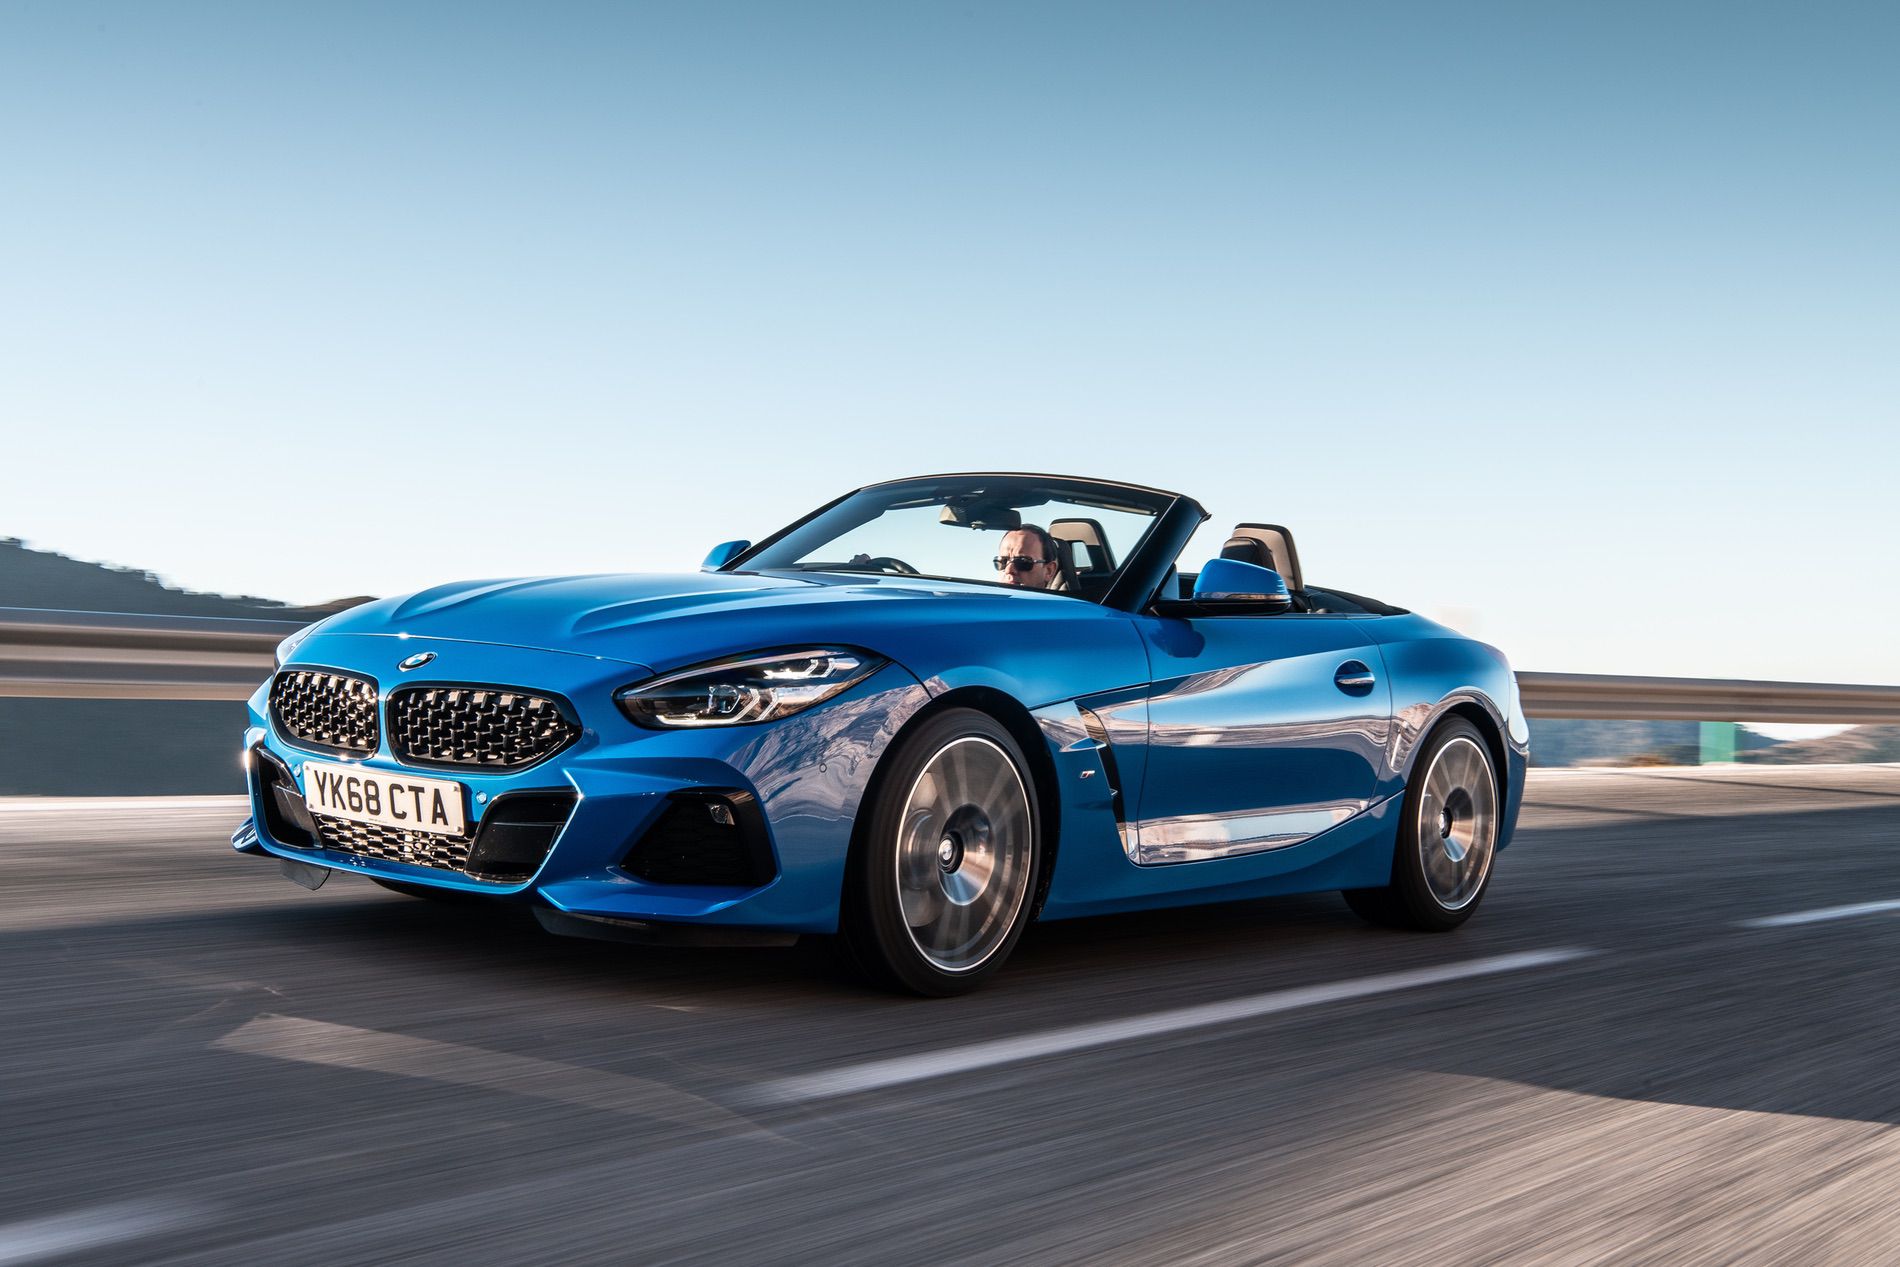 Photoshoot With The Bmw Z4 Sdrive20i M Sport Package In Misano Blue Metallic I New Cars